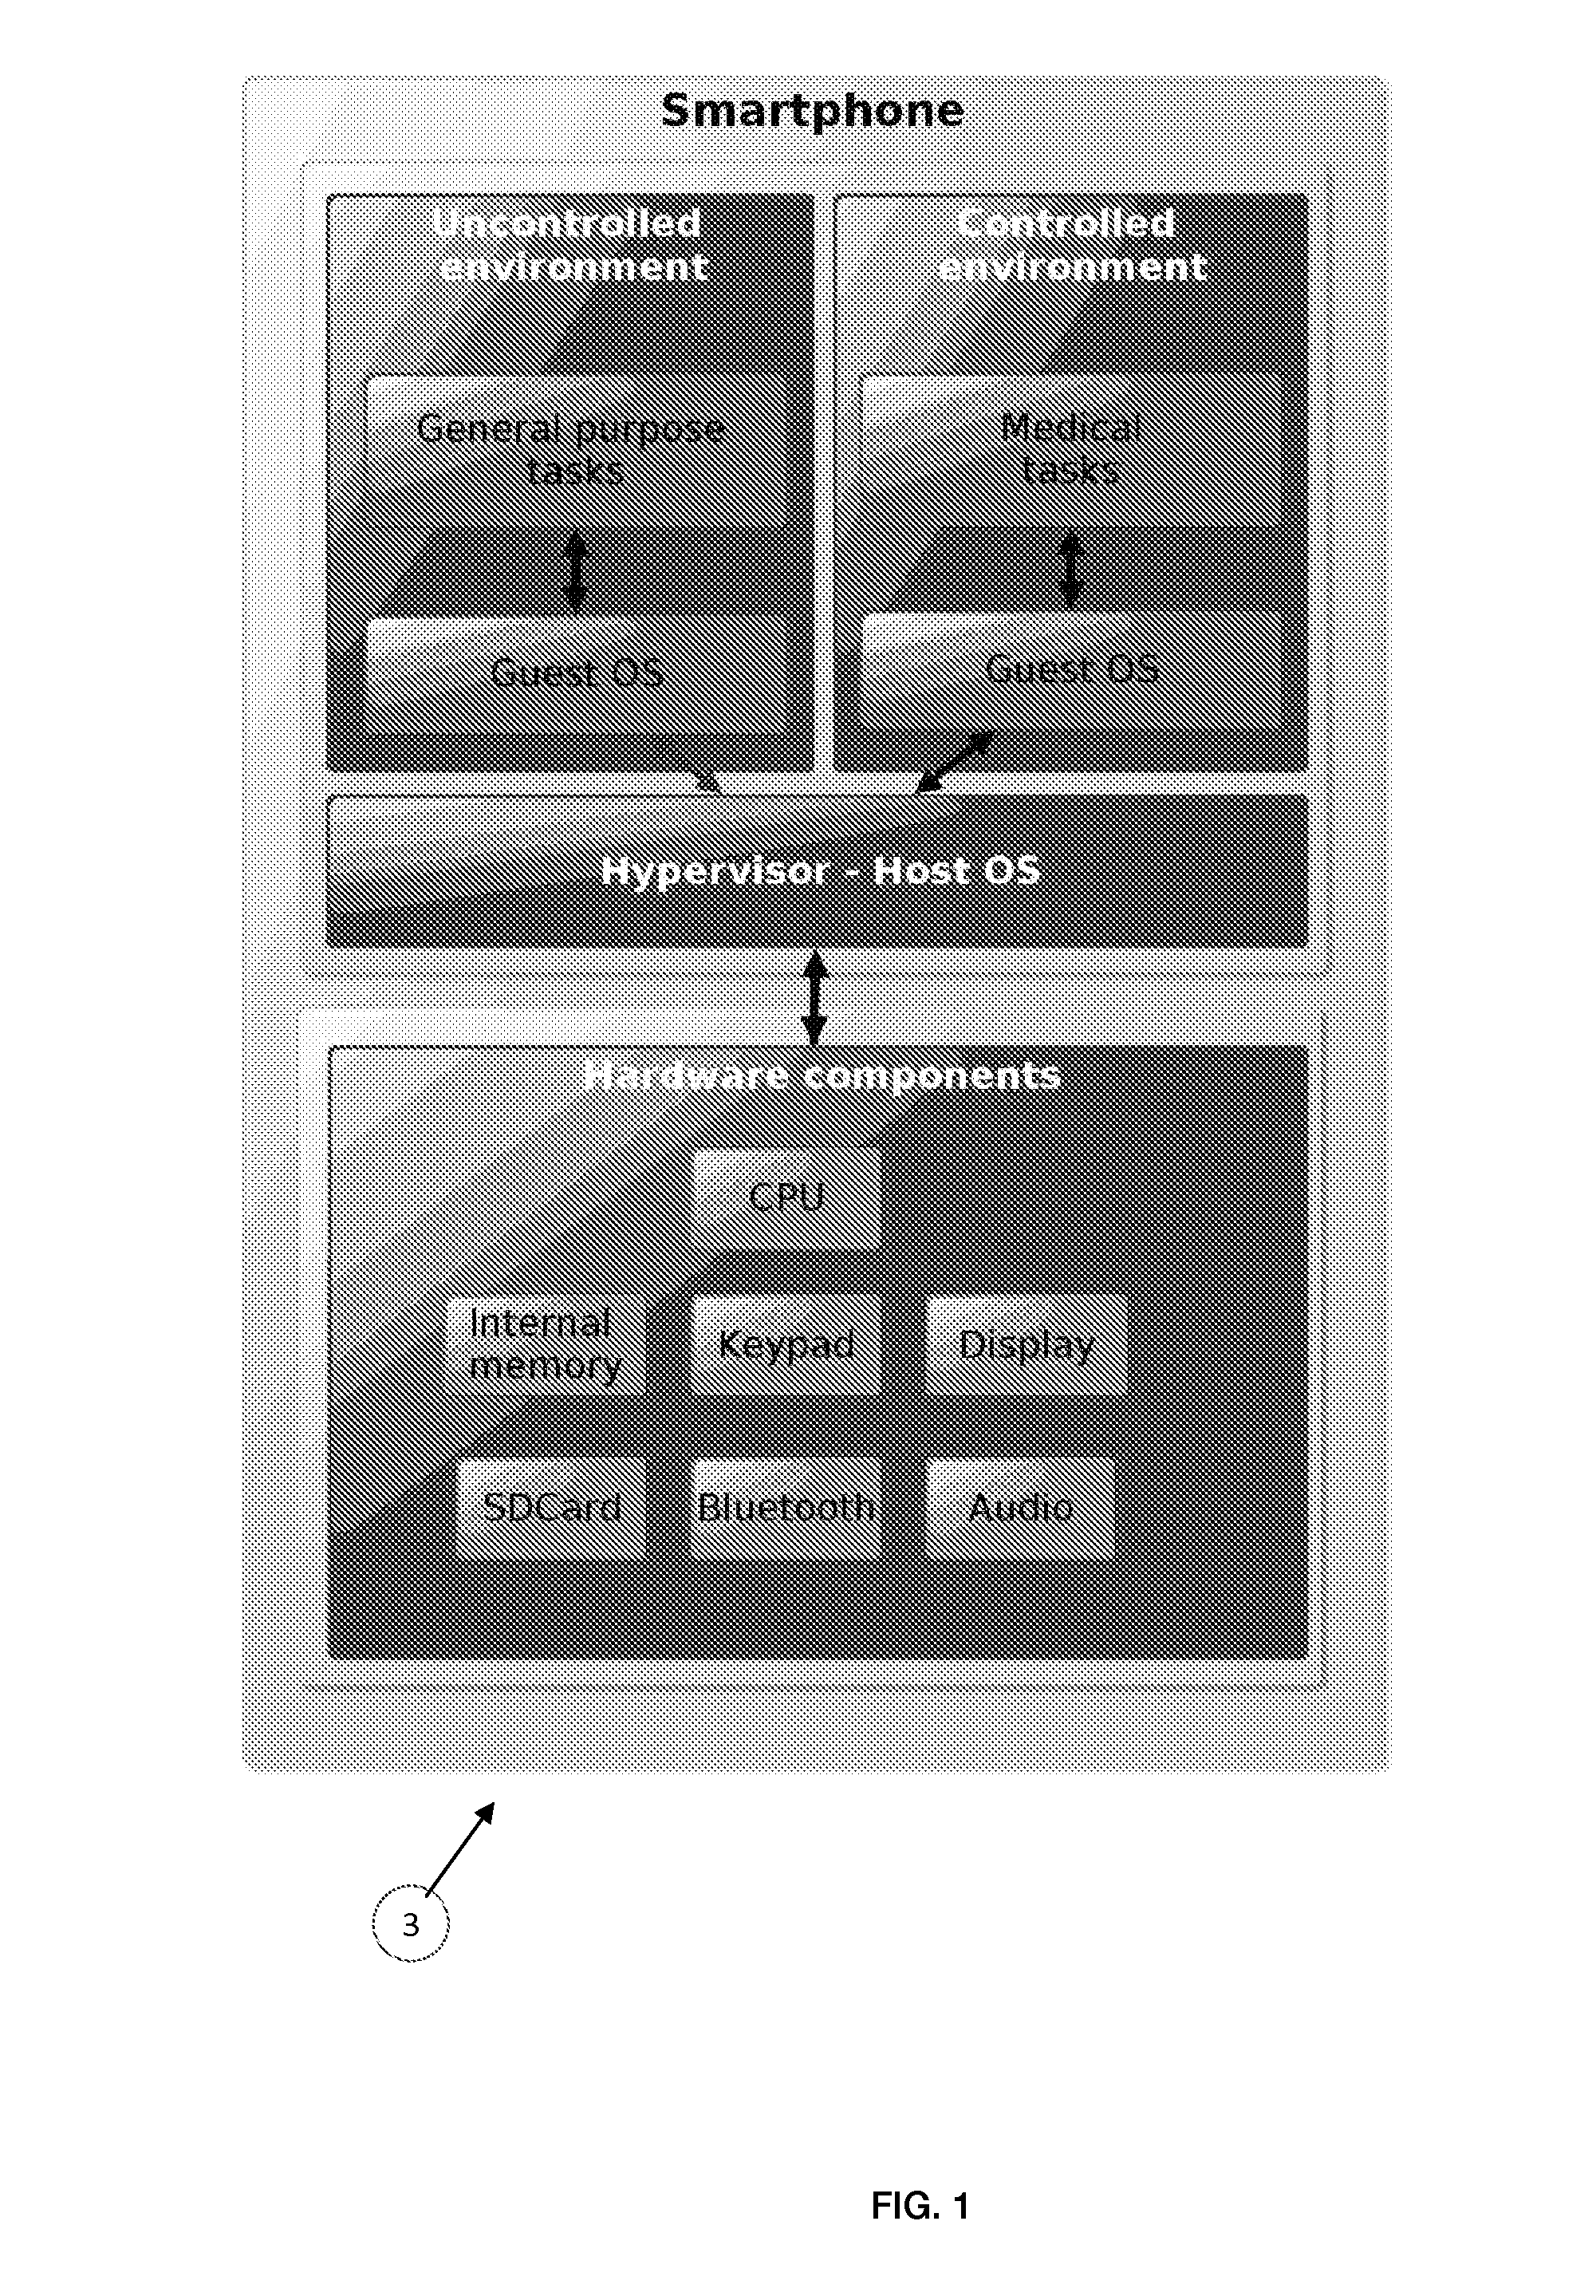 Mobile virtualization platform for the remote control of a medical device